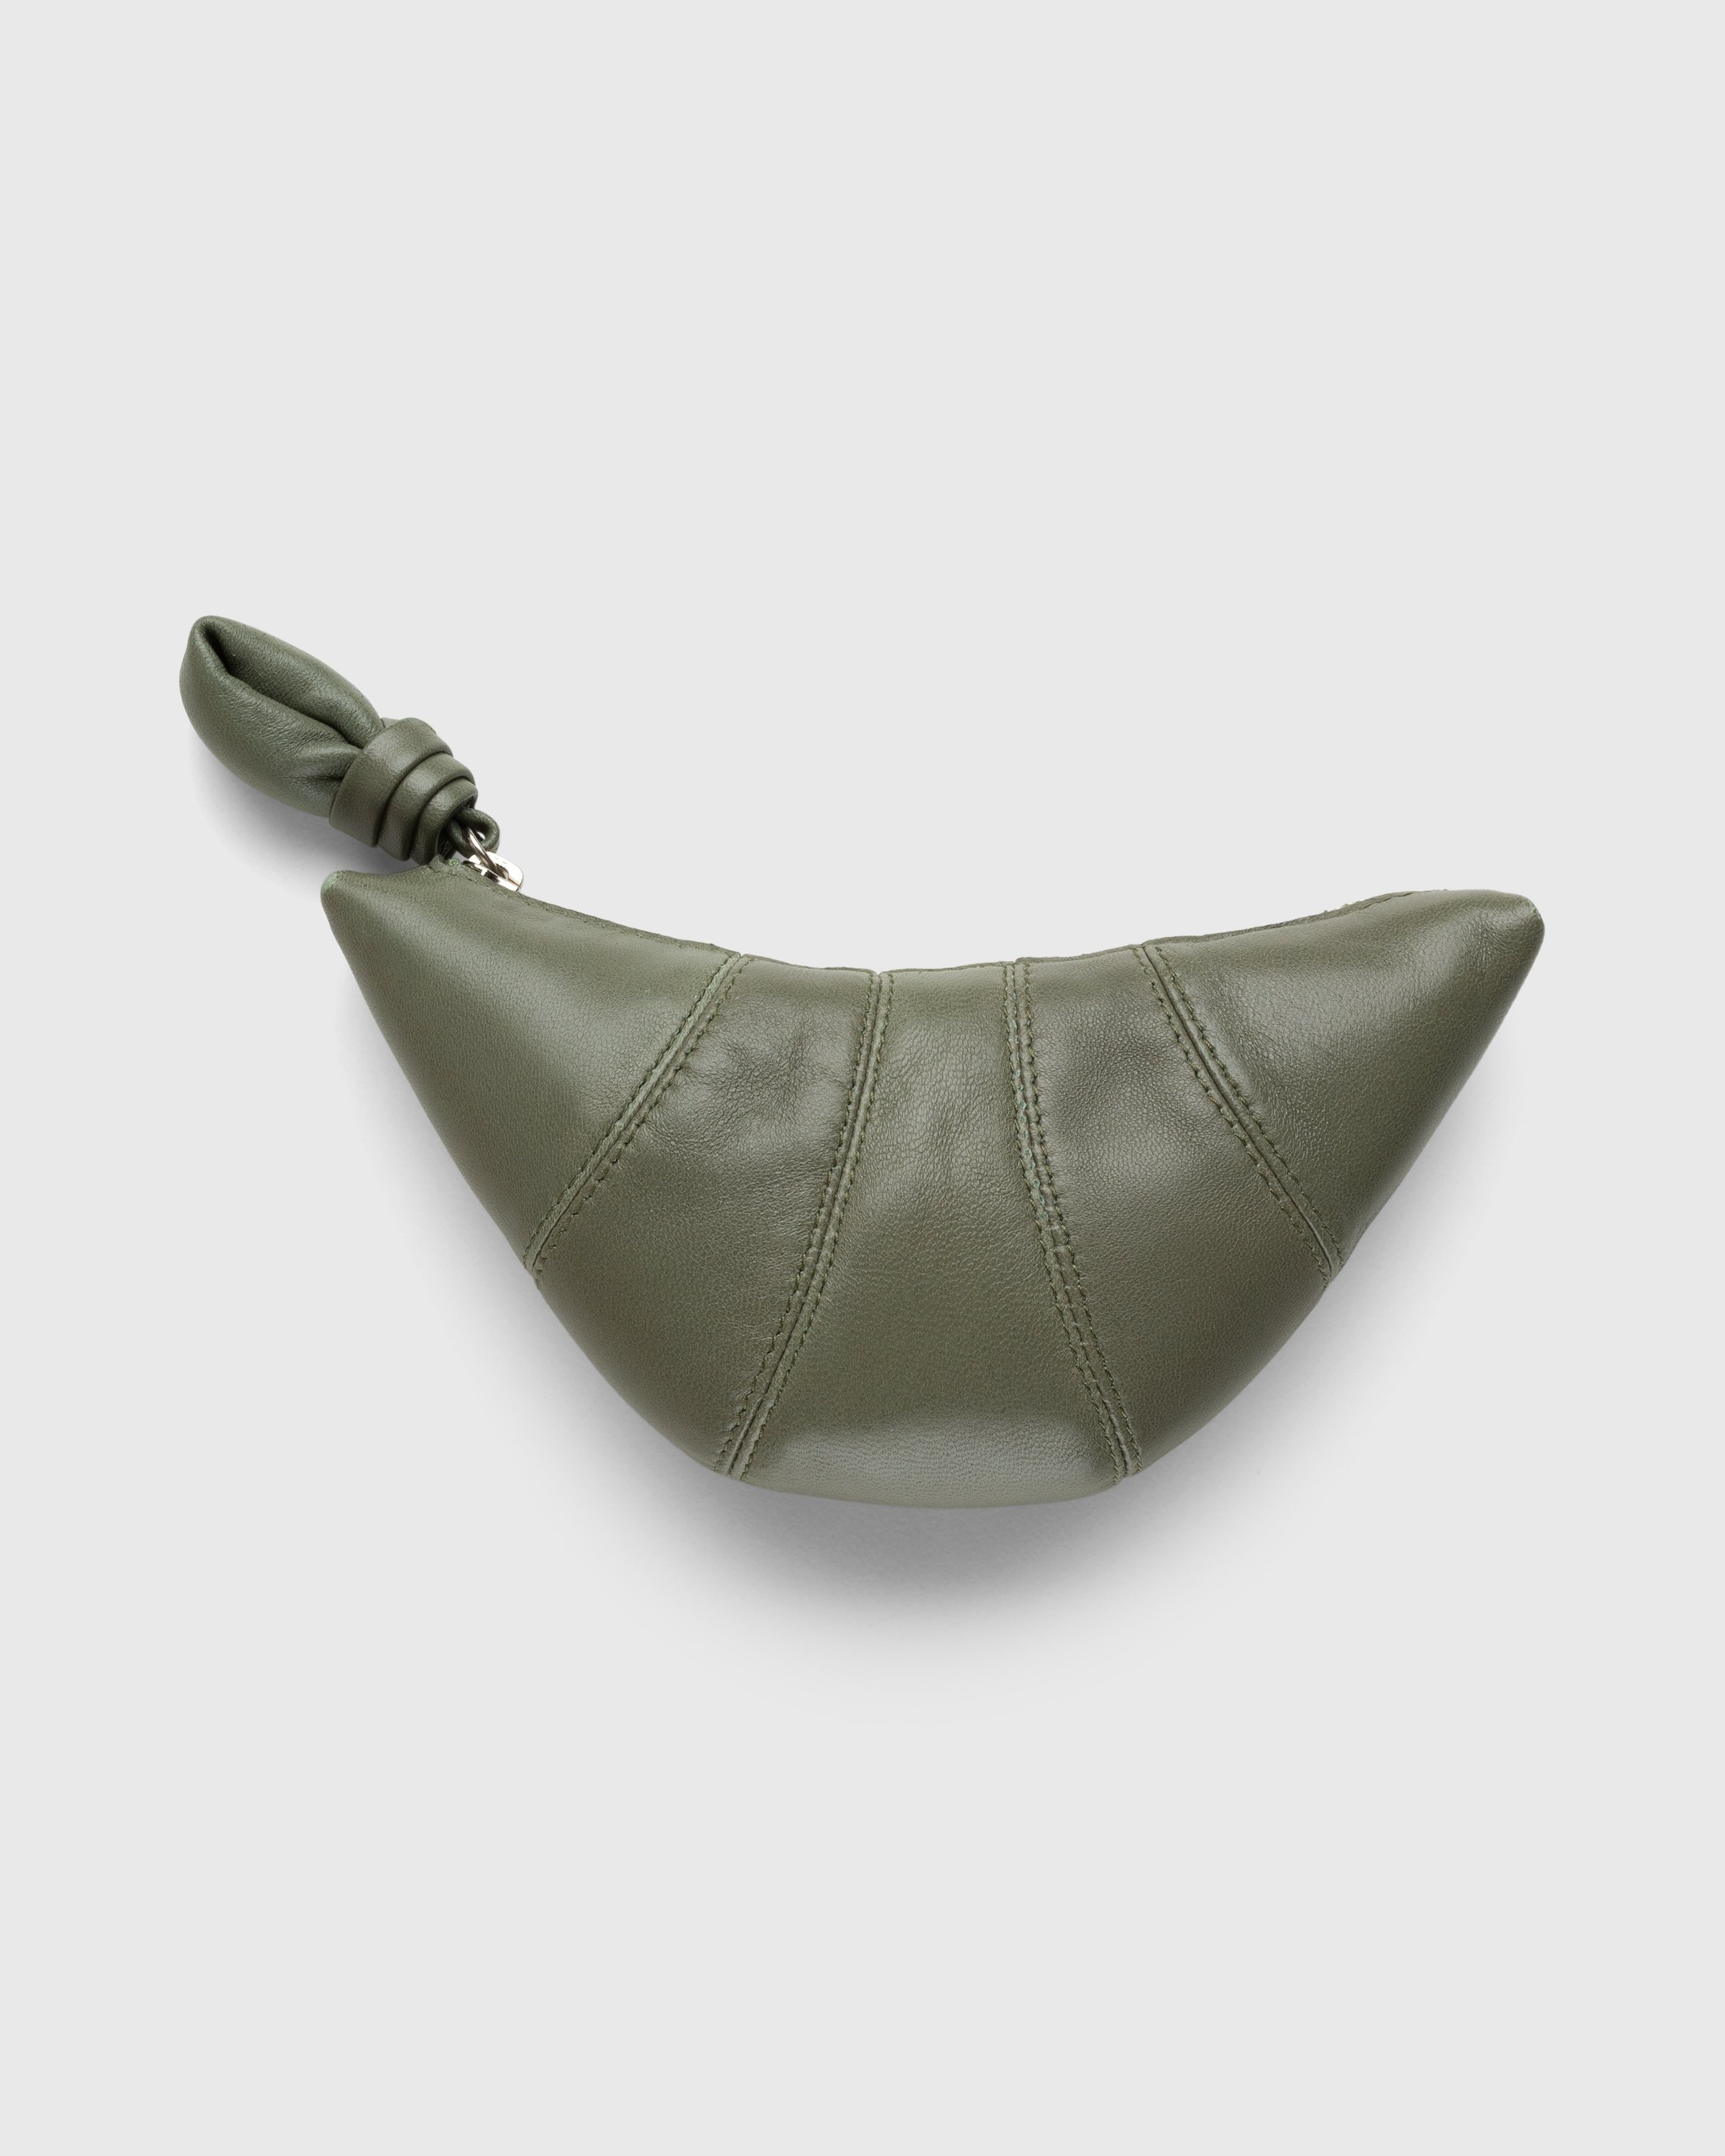 Lemaire x Highsnobiety – Not In Paris 4 Croissant Coin Purse Sage - Zip Wallets - Green - Image 1